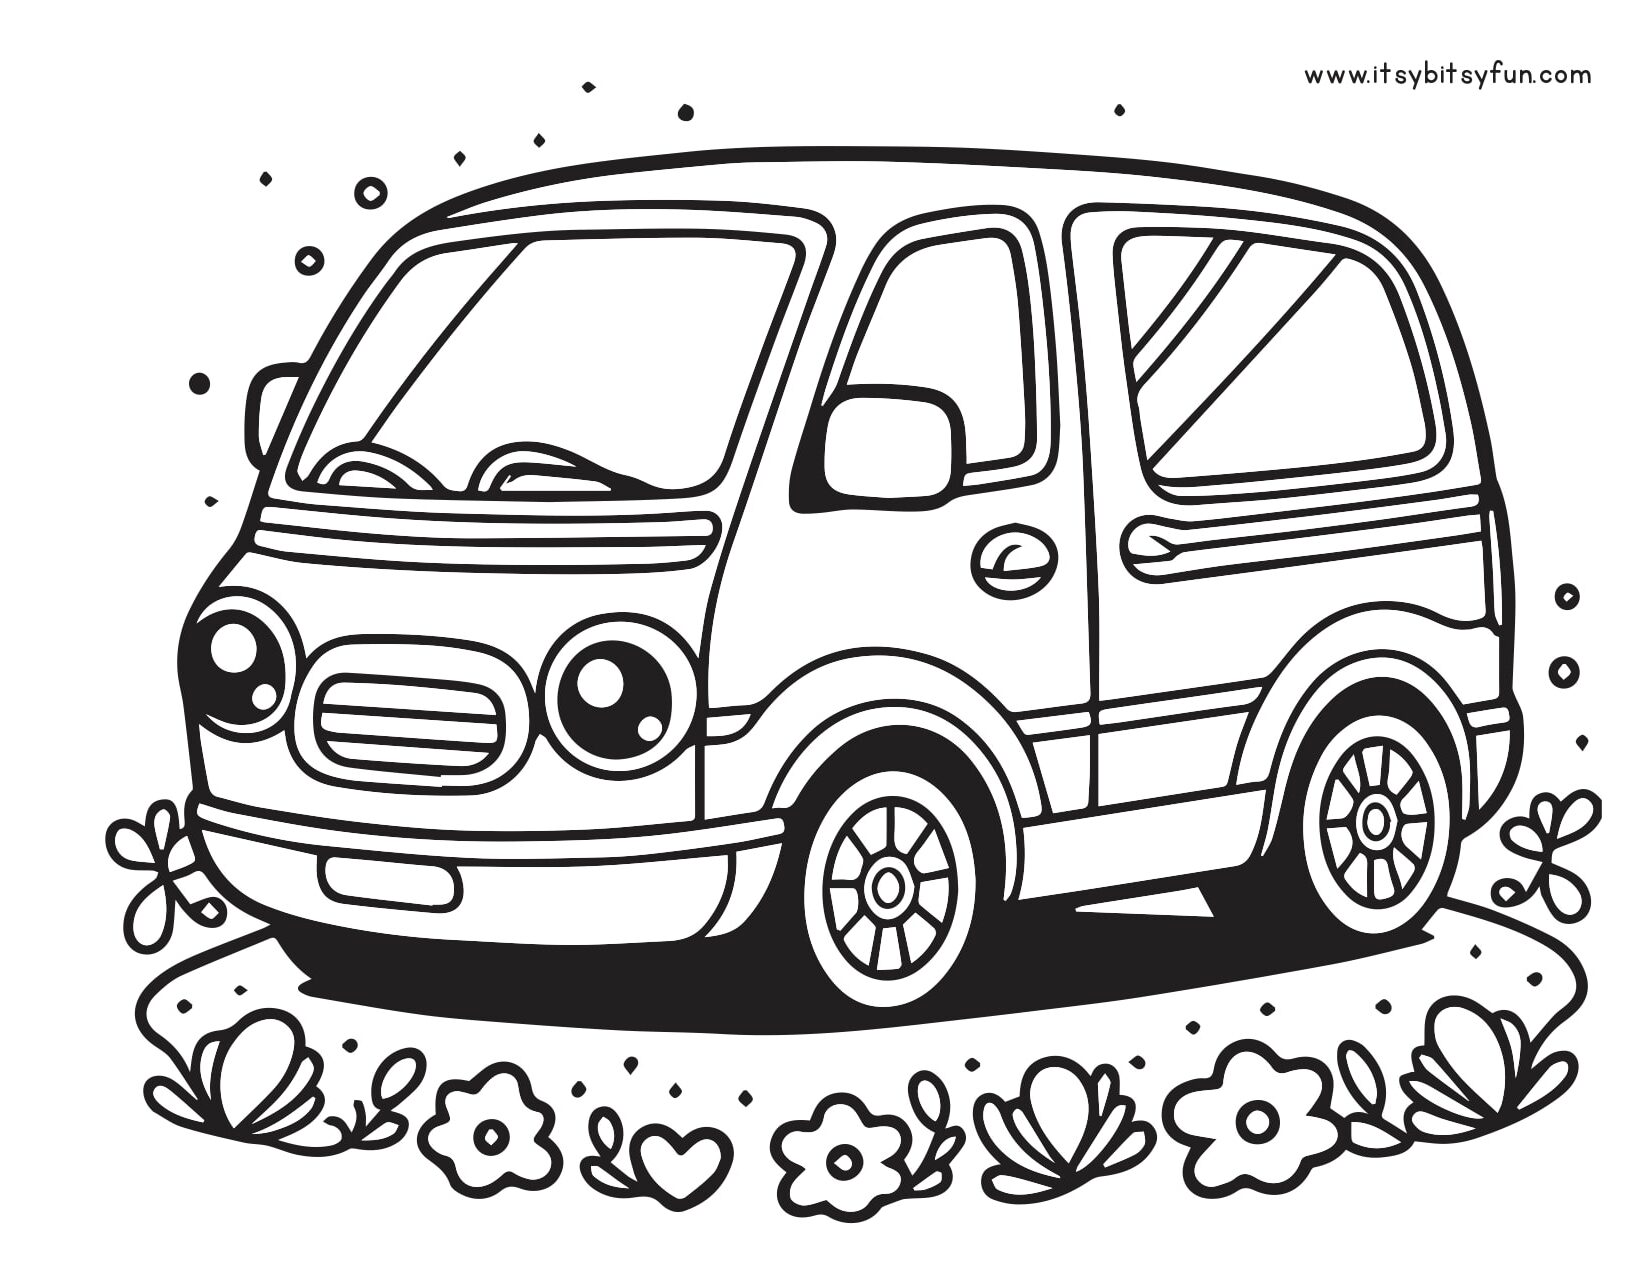 Happy van coloring page for kids.